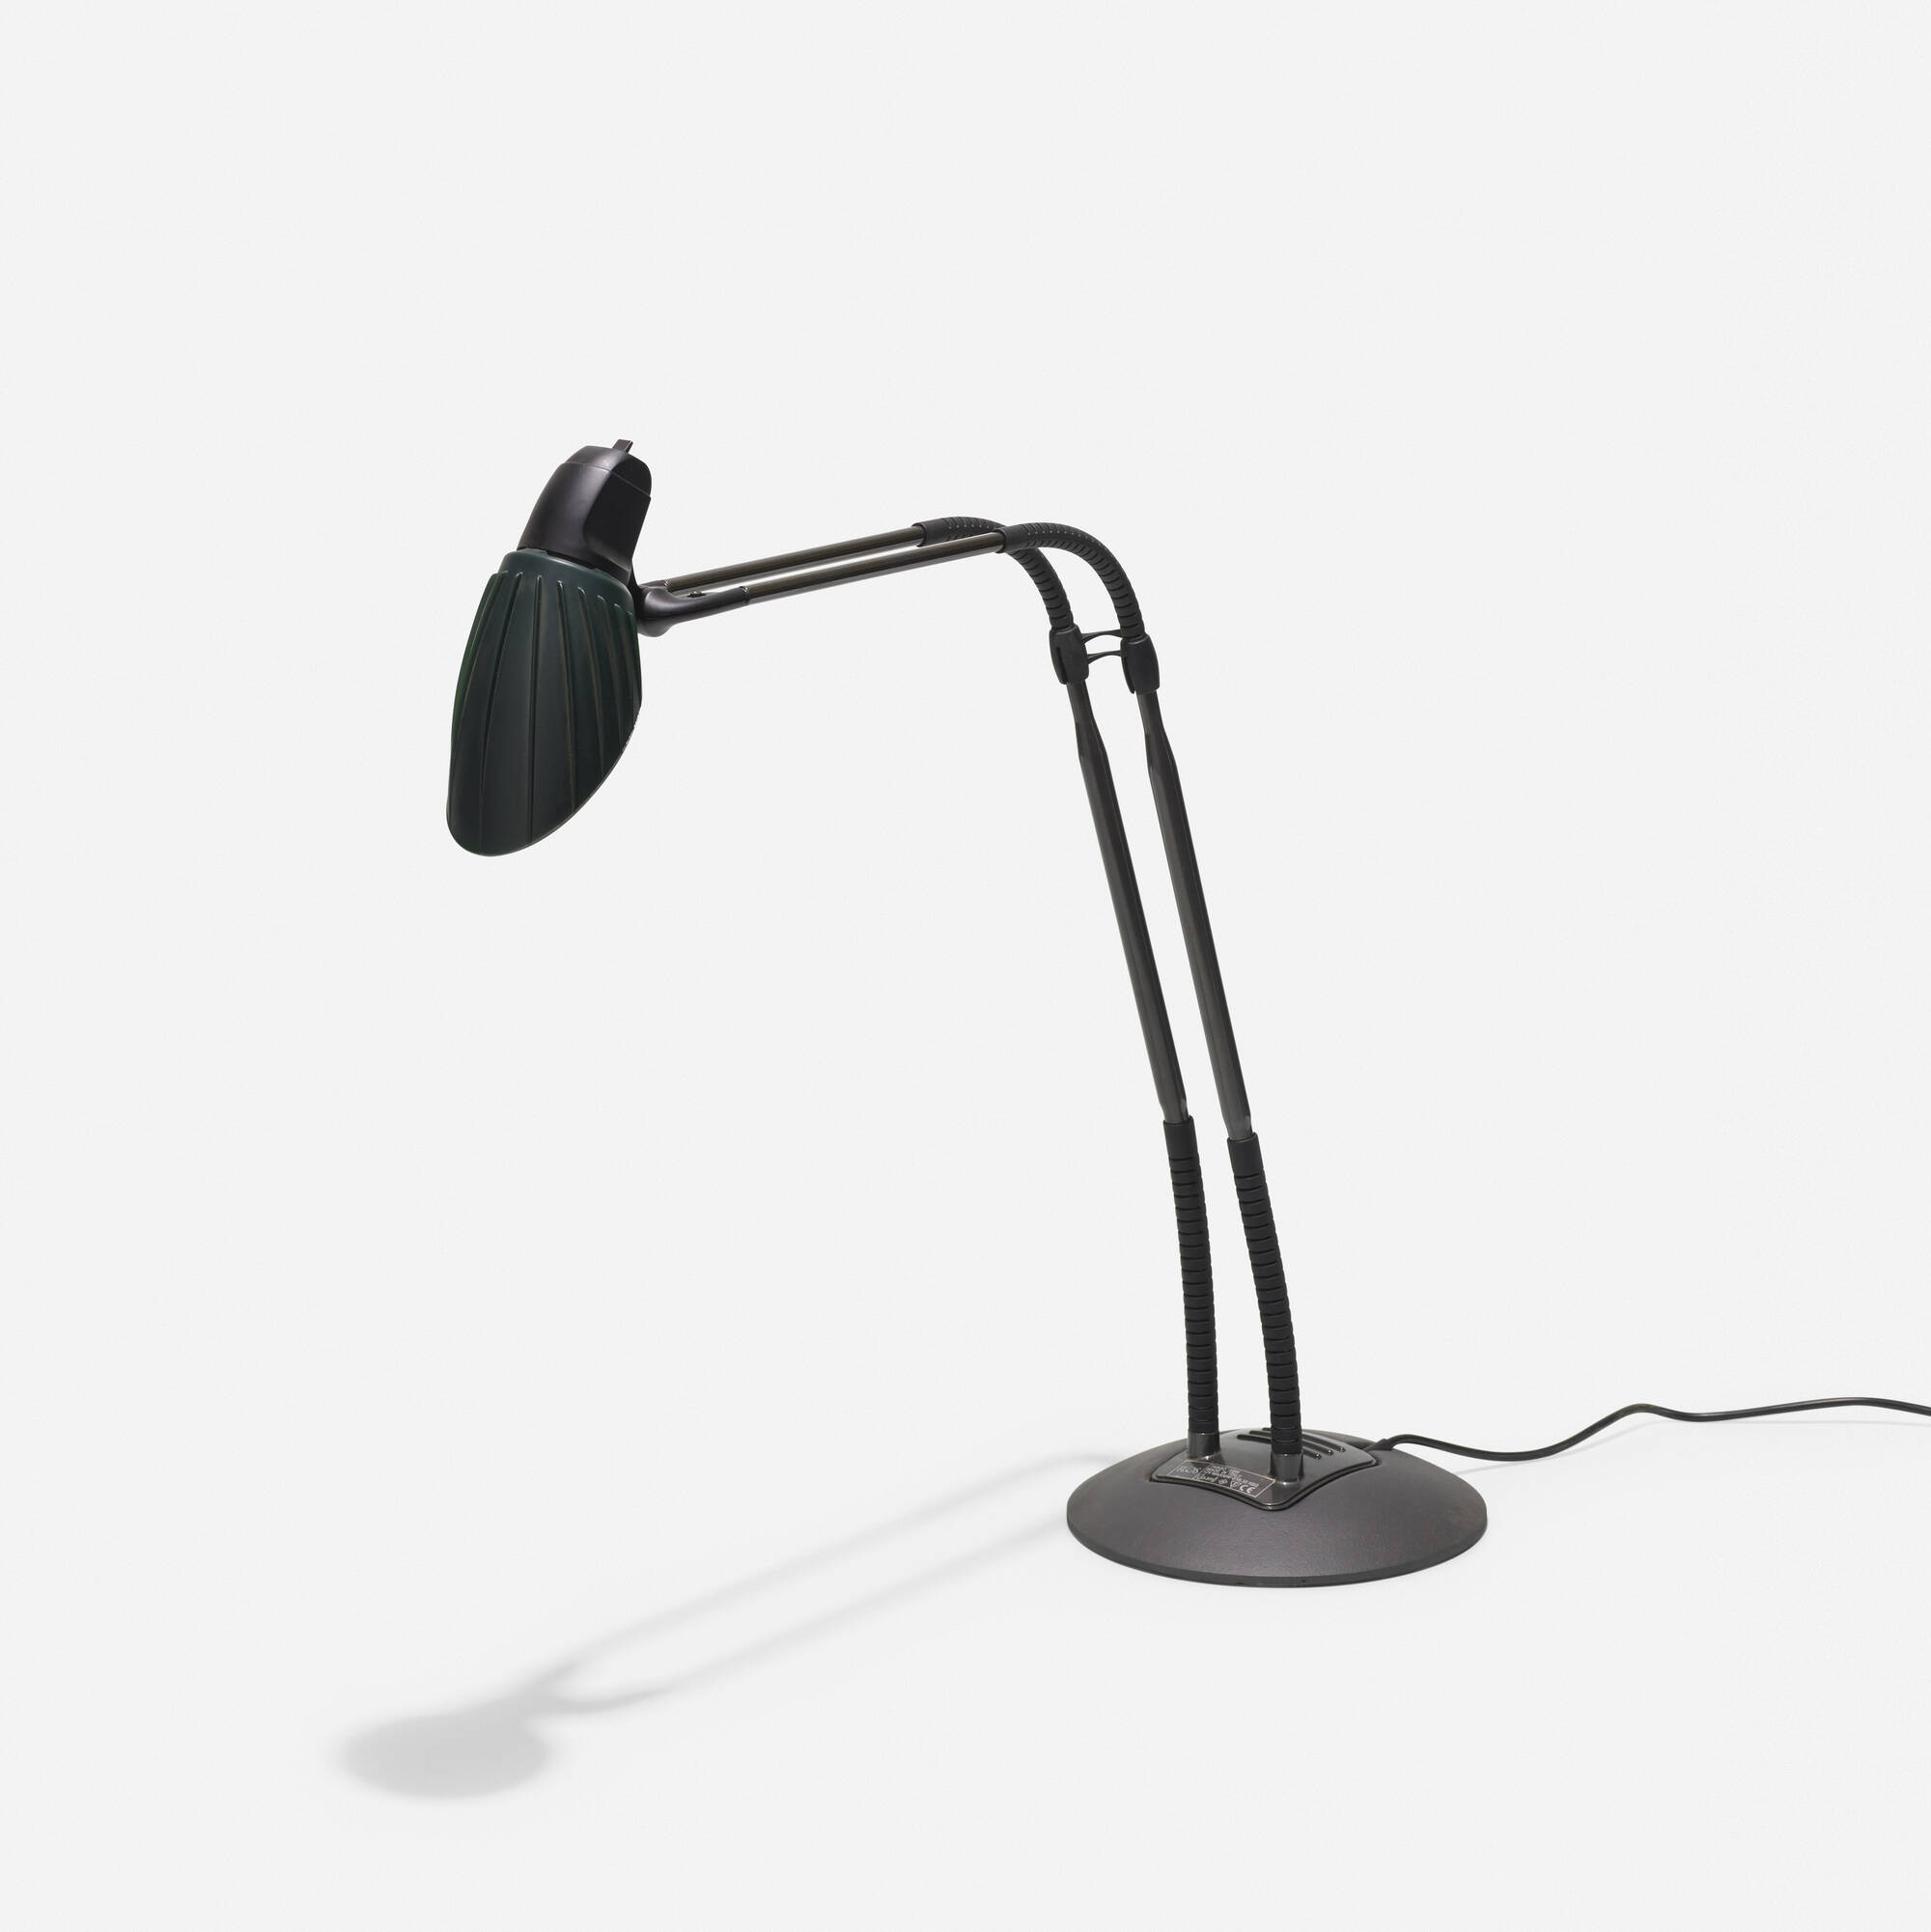 zuur maat Verouderd 312: STEPHAN COPELAND, Tango table lamp < Taxonomy of Design: Selections  from Thessaloniki Design Museum, 25 August 2016 < Auctions | Wright:  Auctions of Art and Design